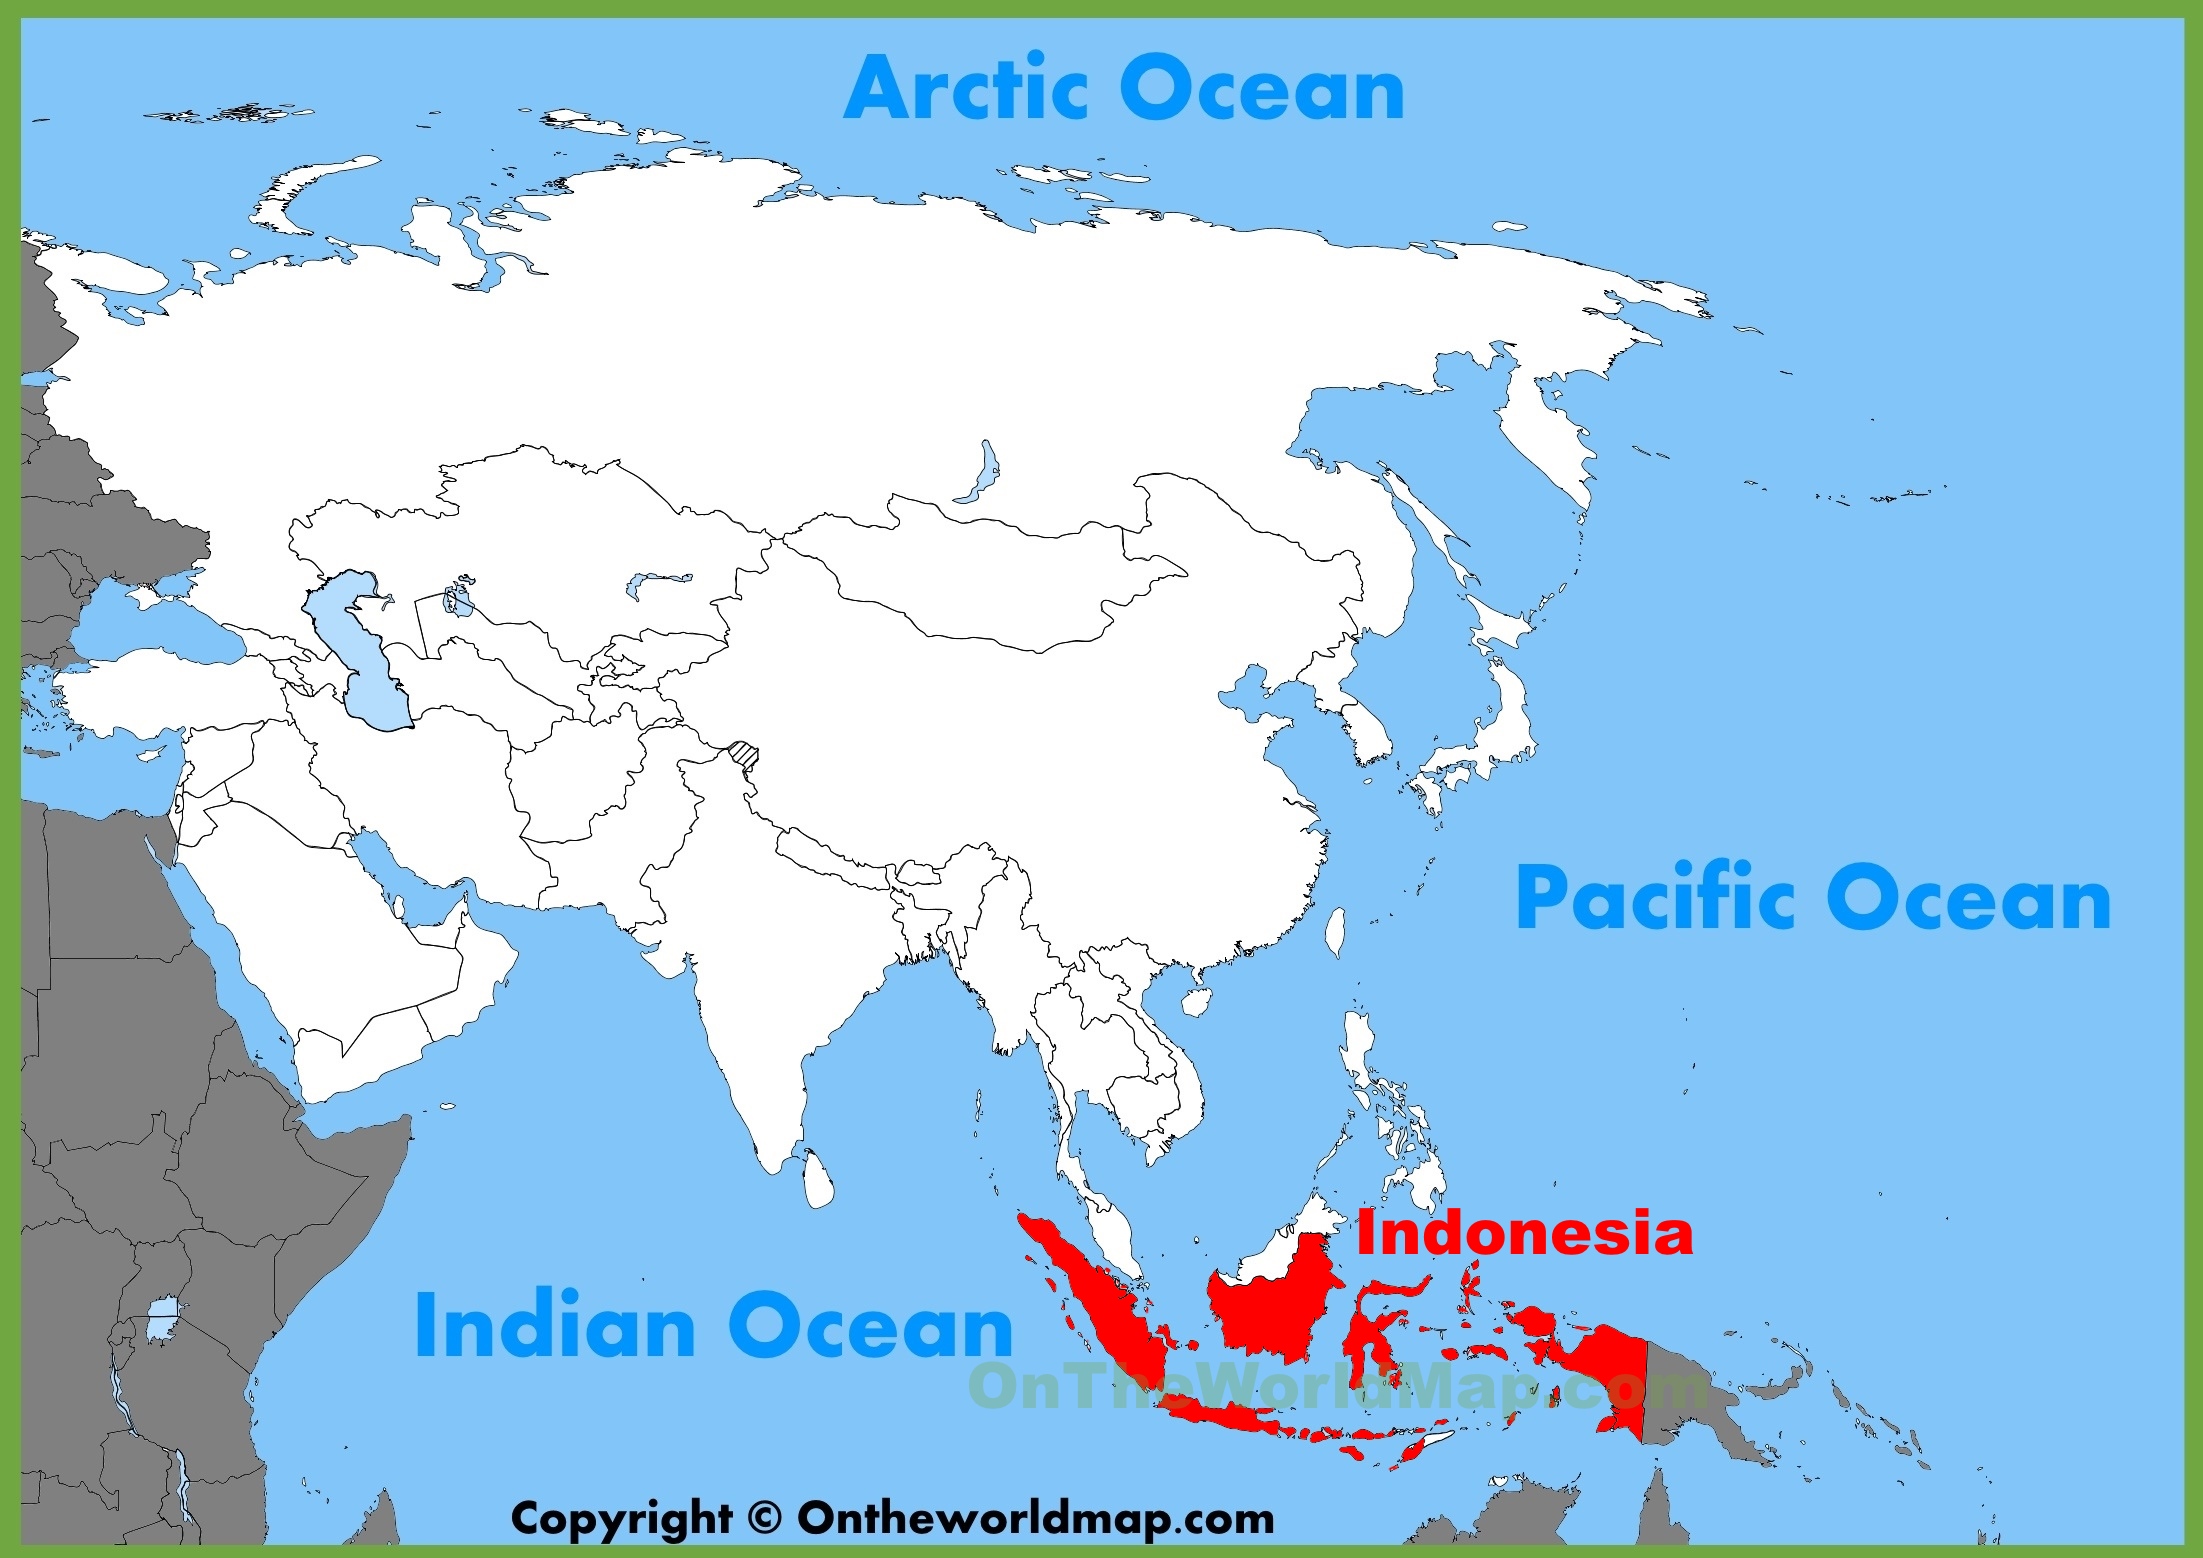 Indonesia Location On The Asia Map